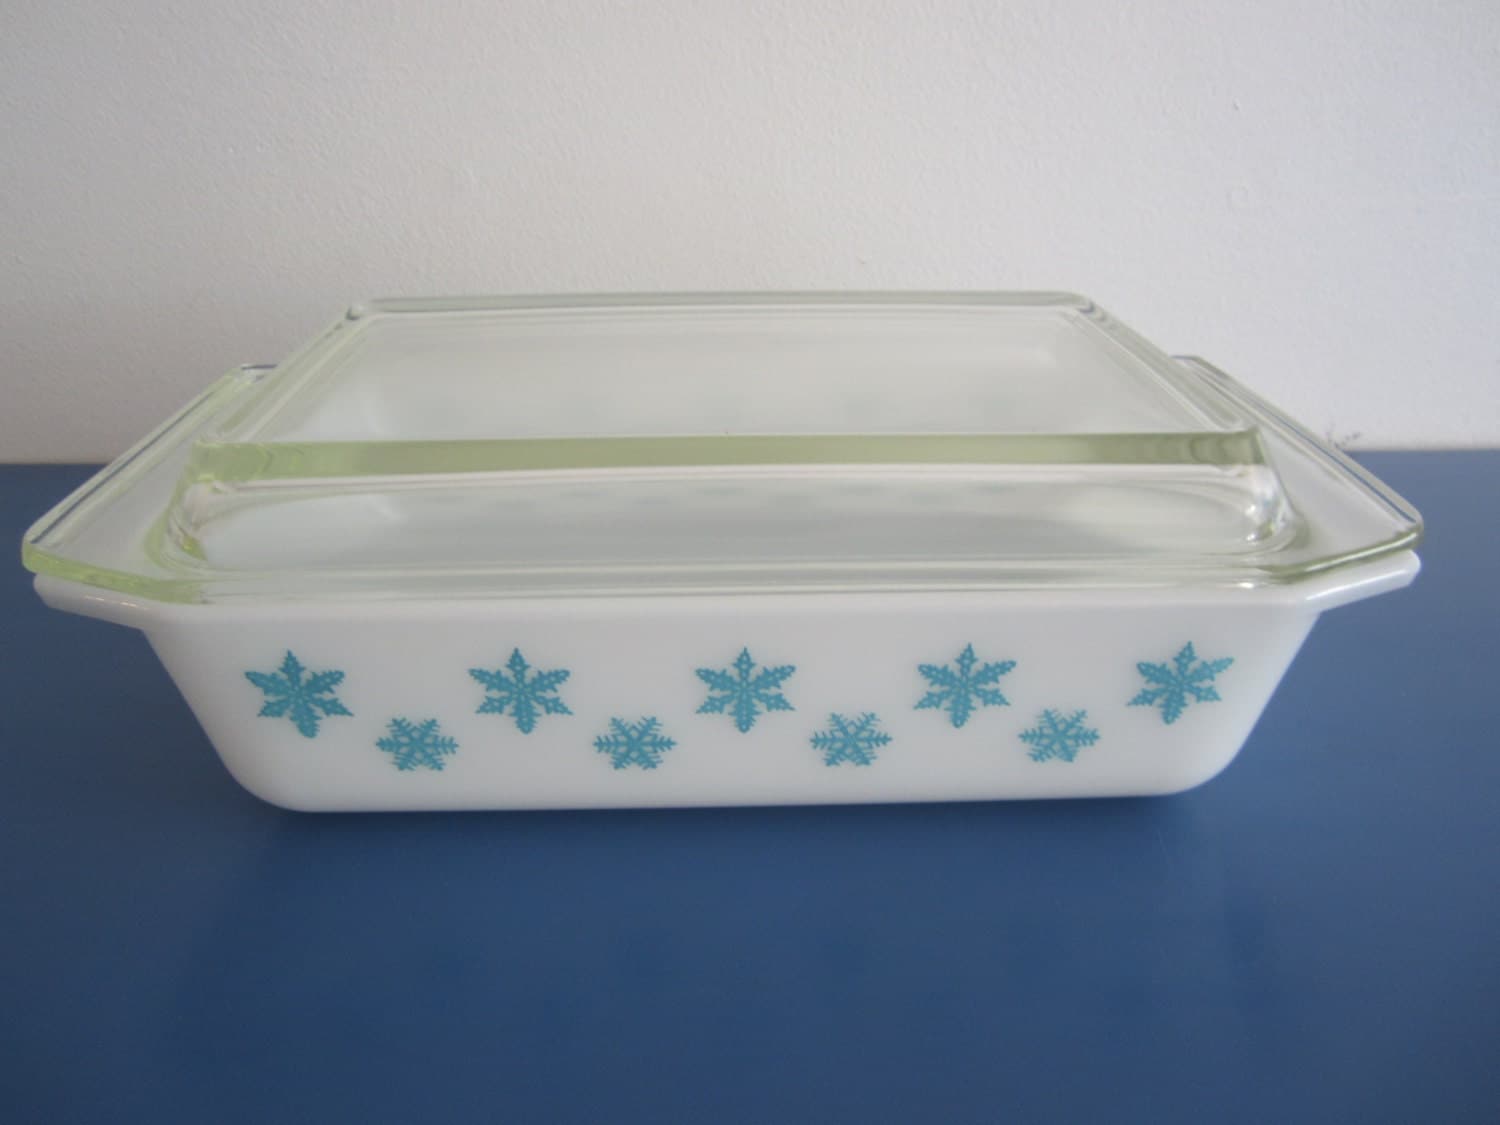 Blue Snowflake Vintage Pyrex Dish with Lid